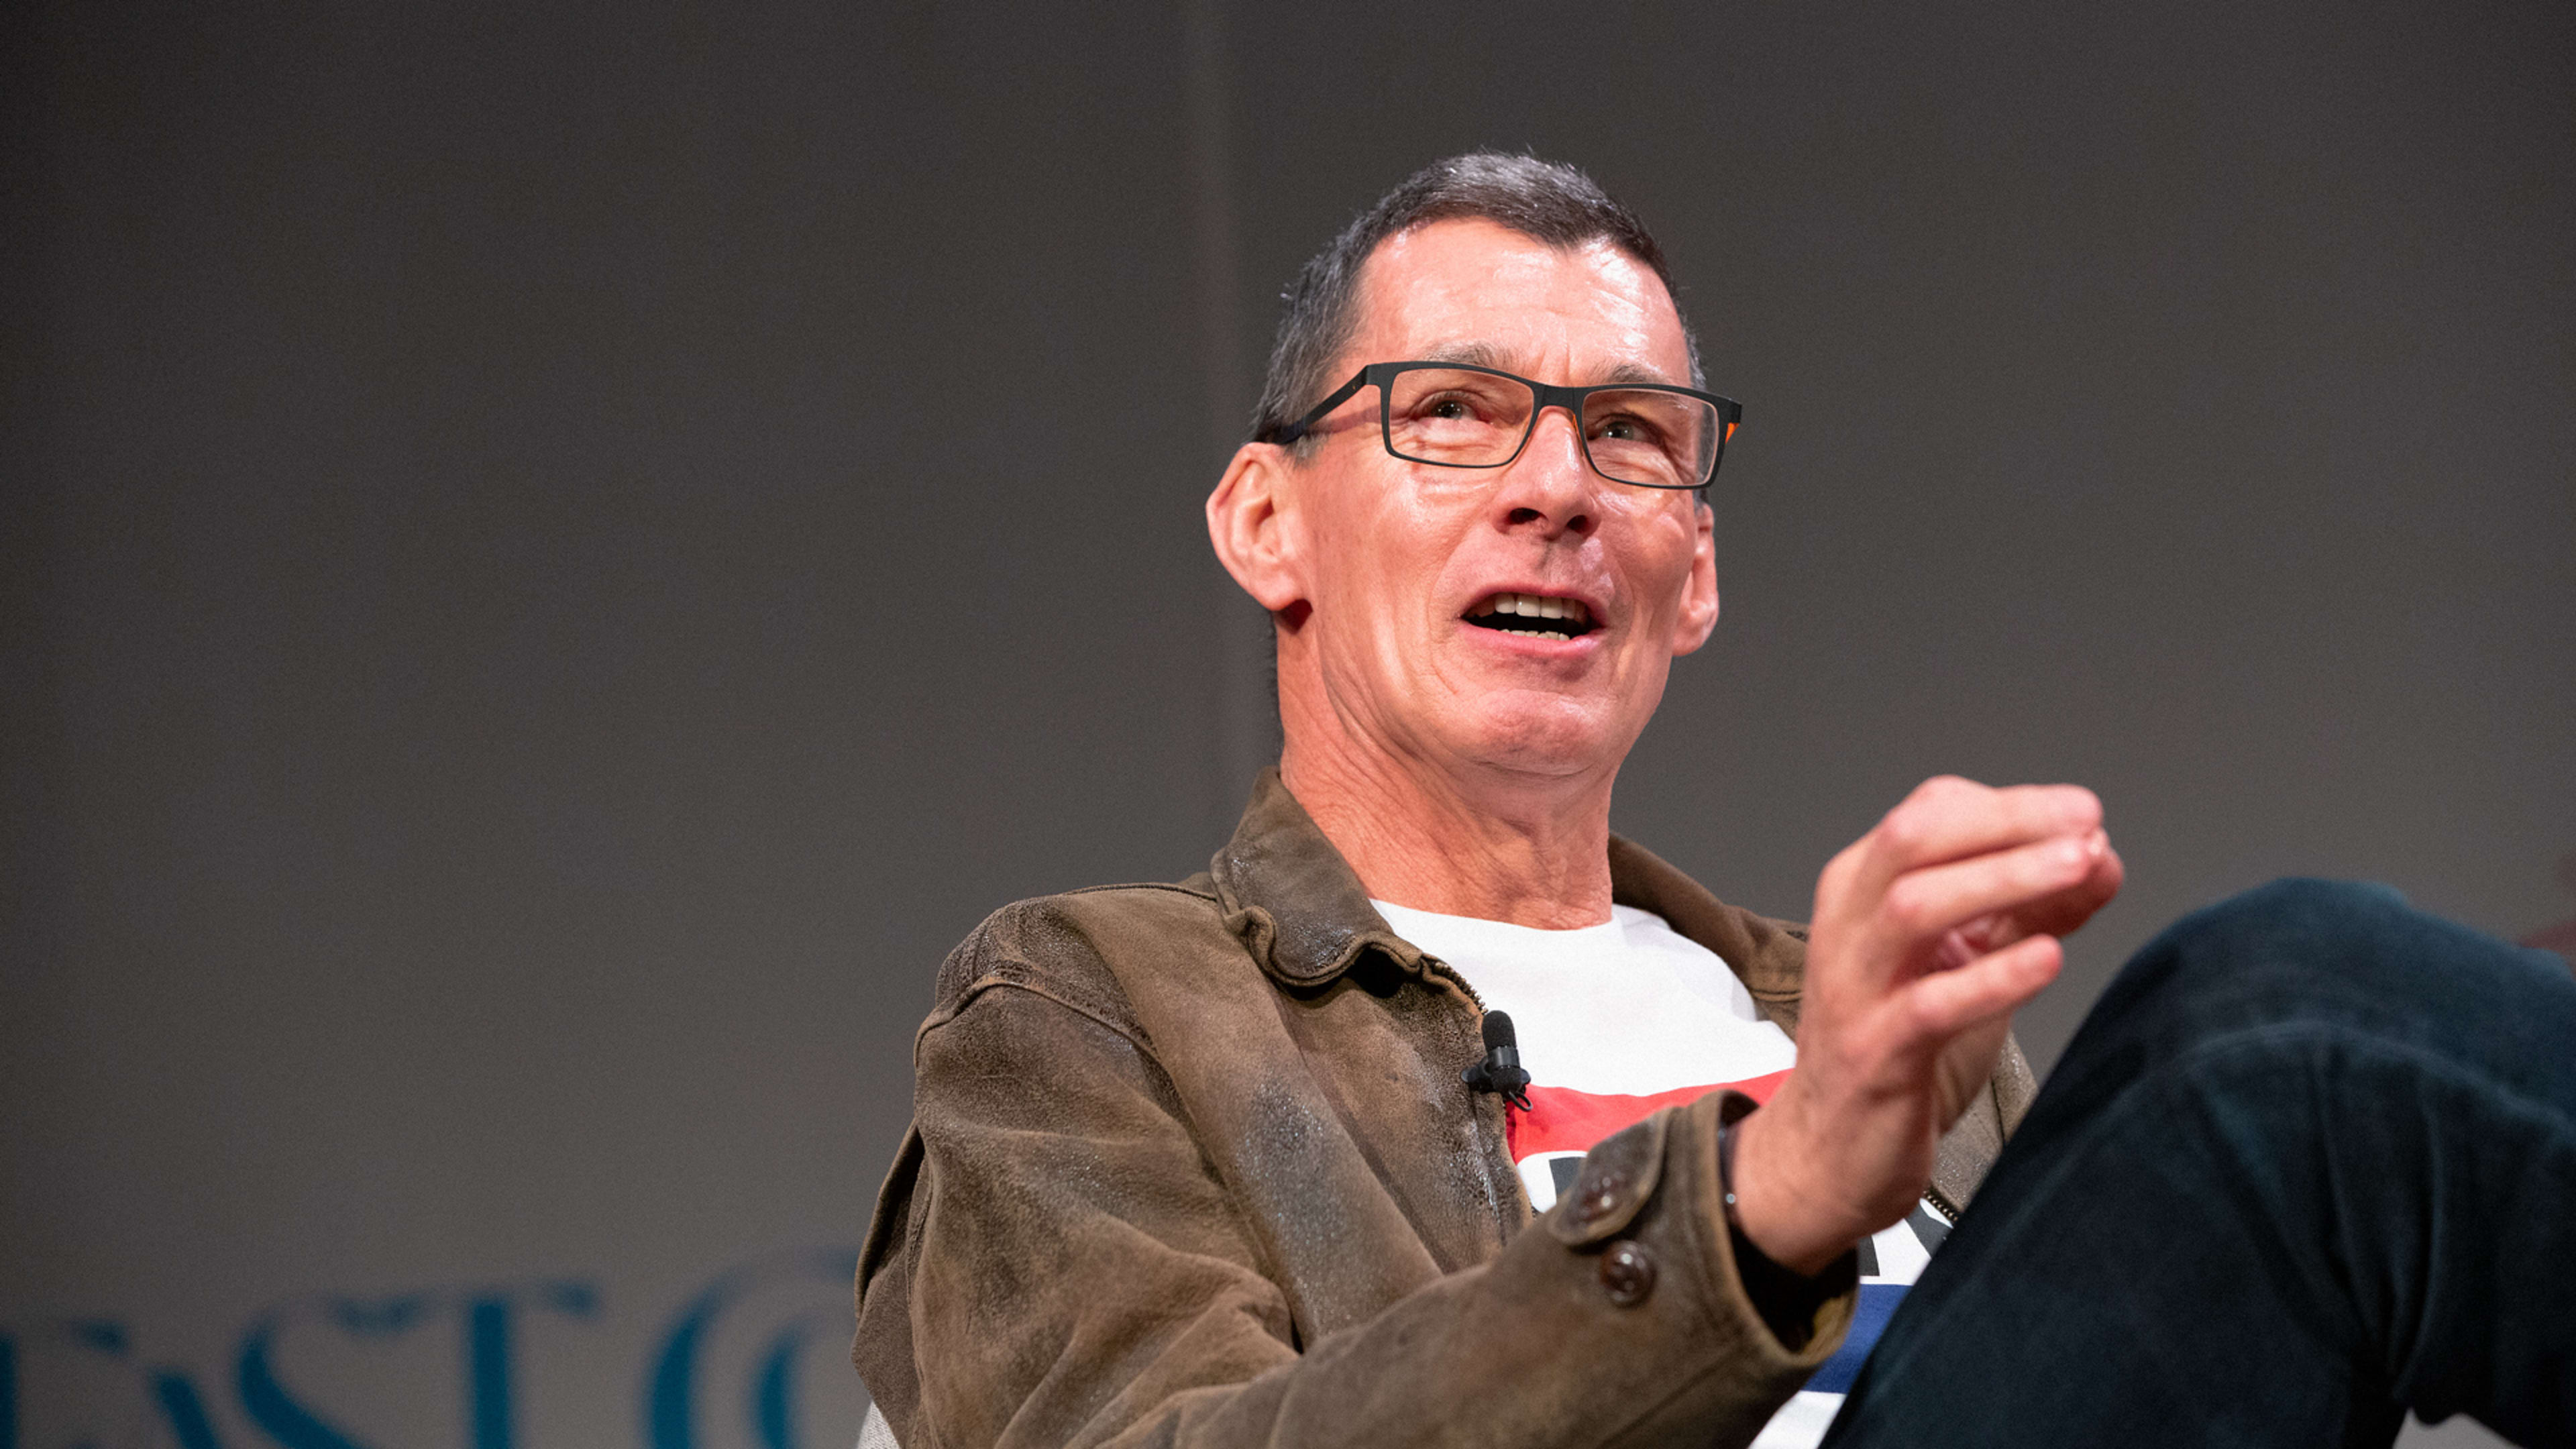 Levi CEO Chip Bergh wants you to give your employees time to vote